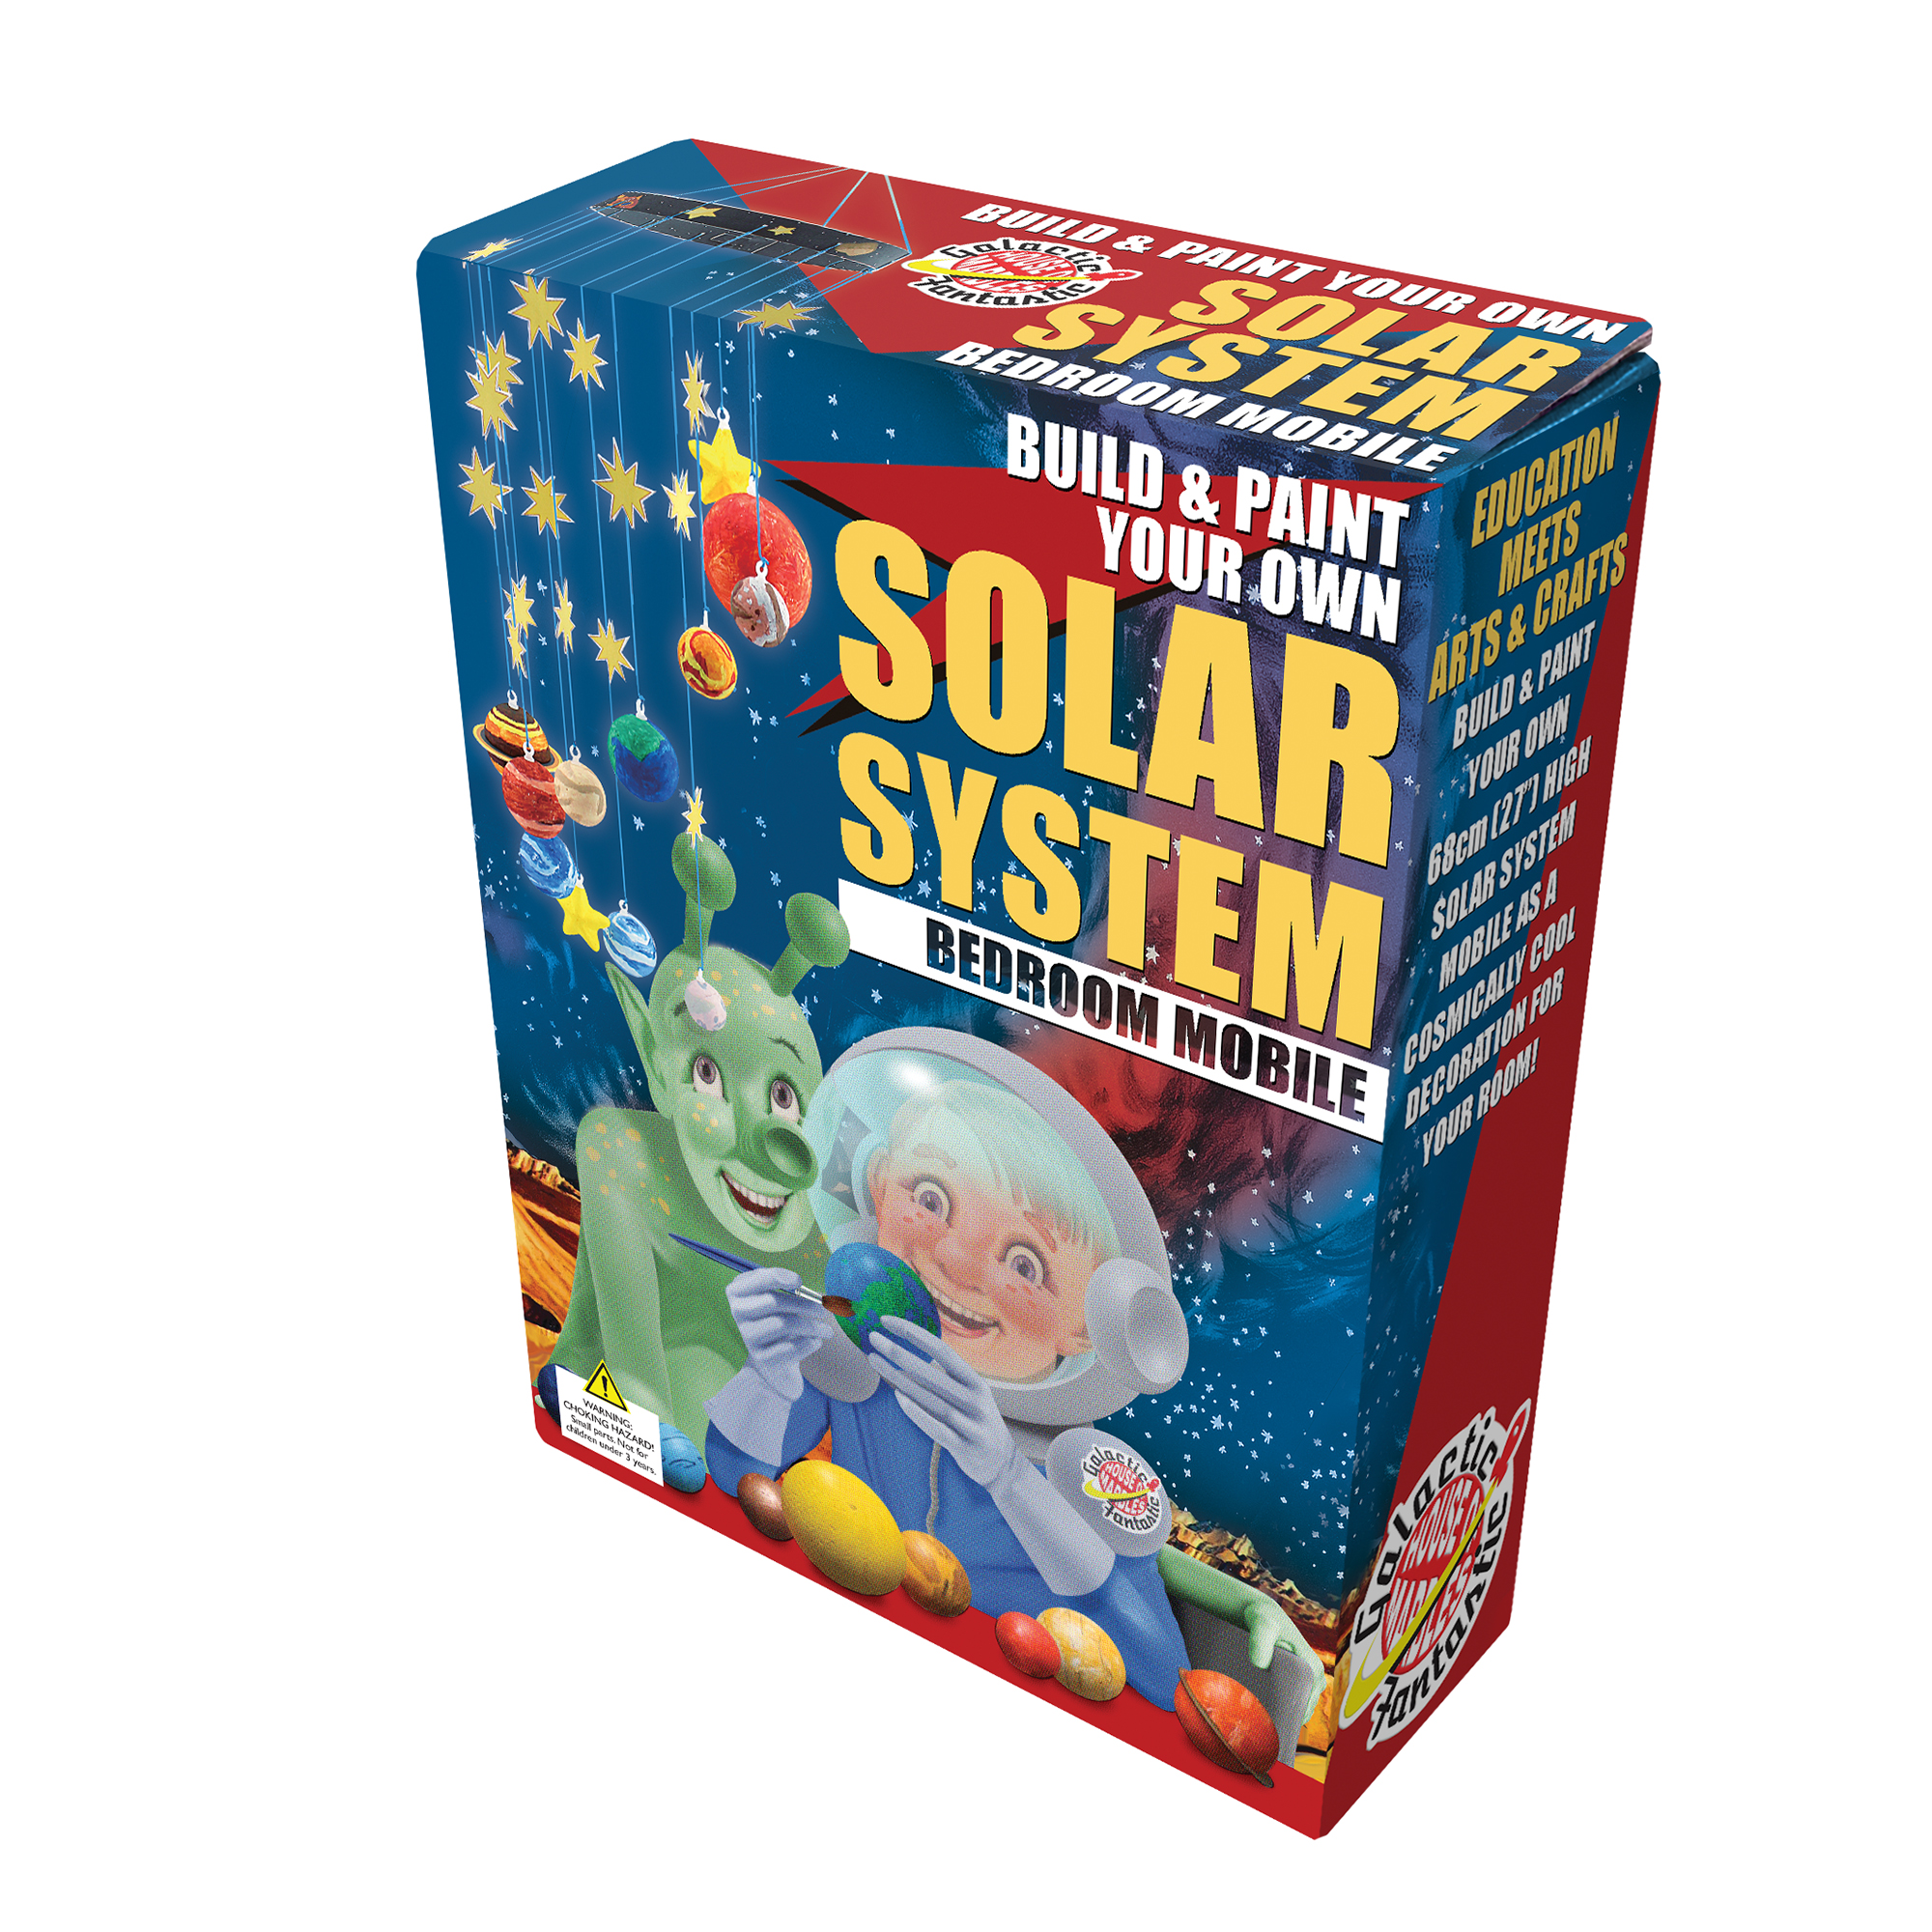 Build and Paint your own Solar System